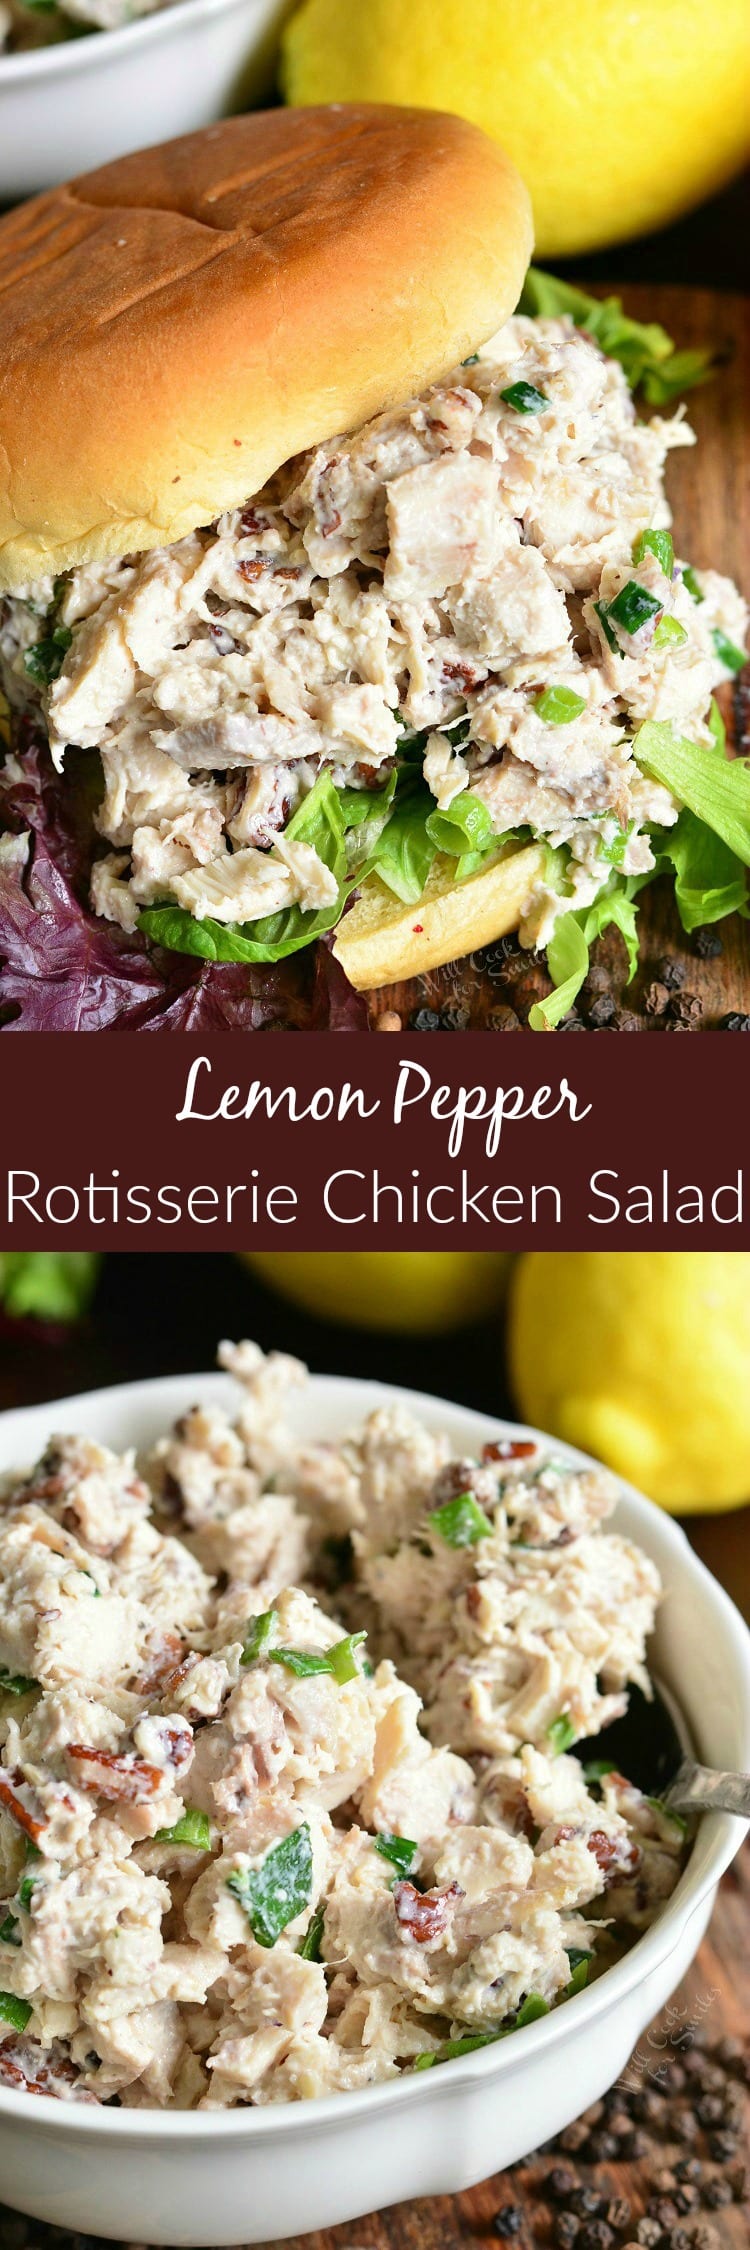 collage top photo Lemon Pepper Rotisserie Chicken Salad on a bun and bottom photo is chicken salad in a white bowl 